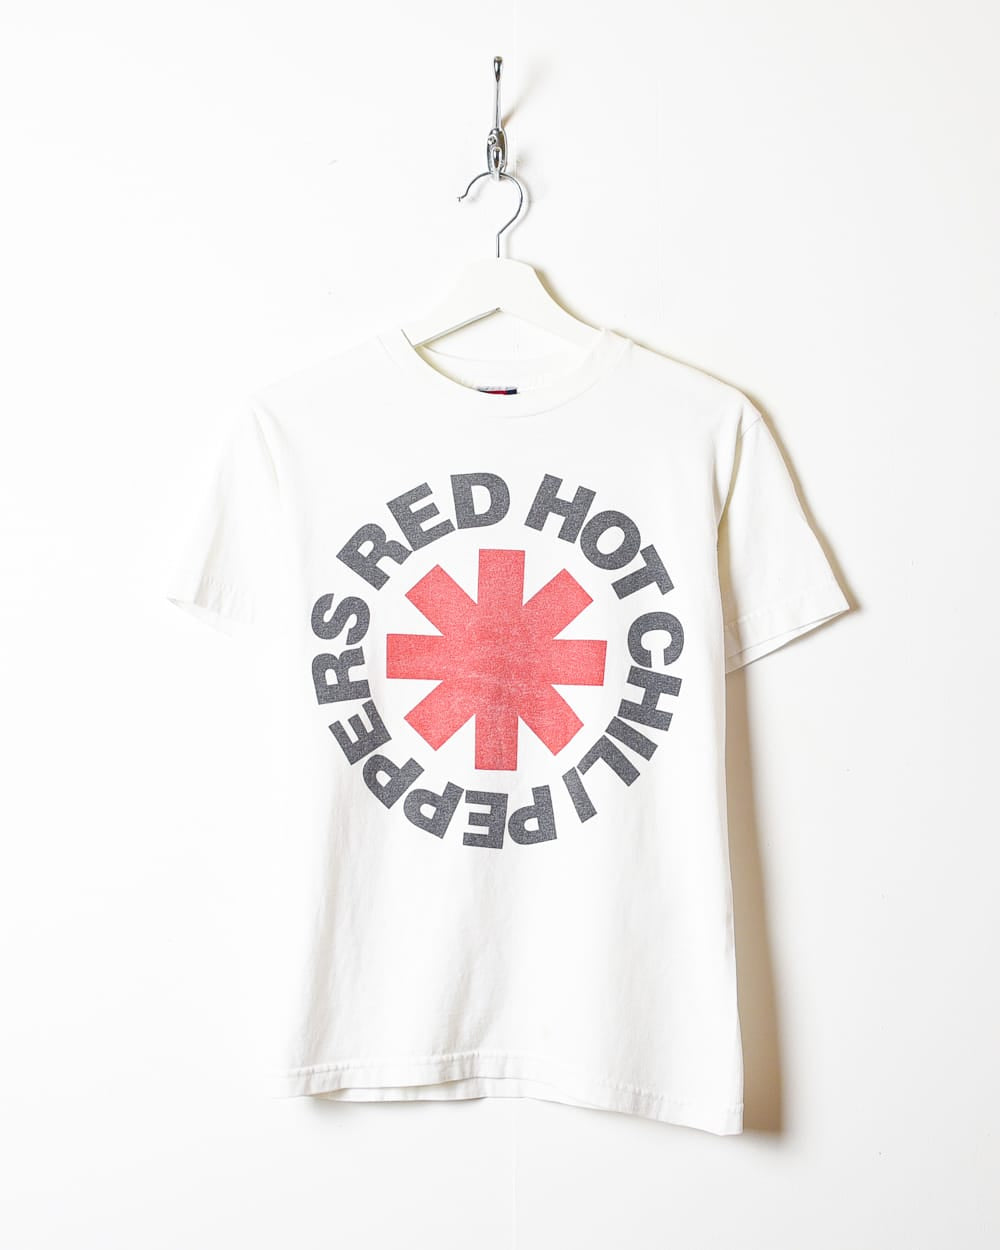 Red Hot Chili Peppers 2002 HawaiiツアーTee-